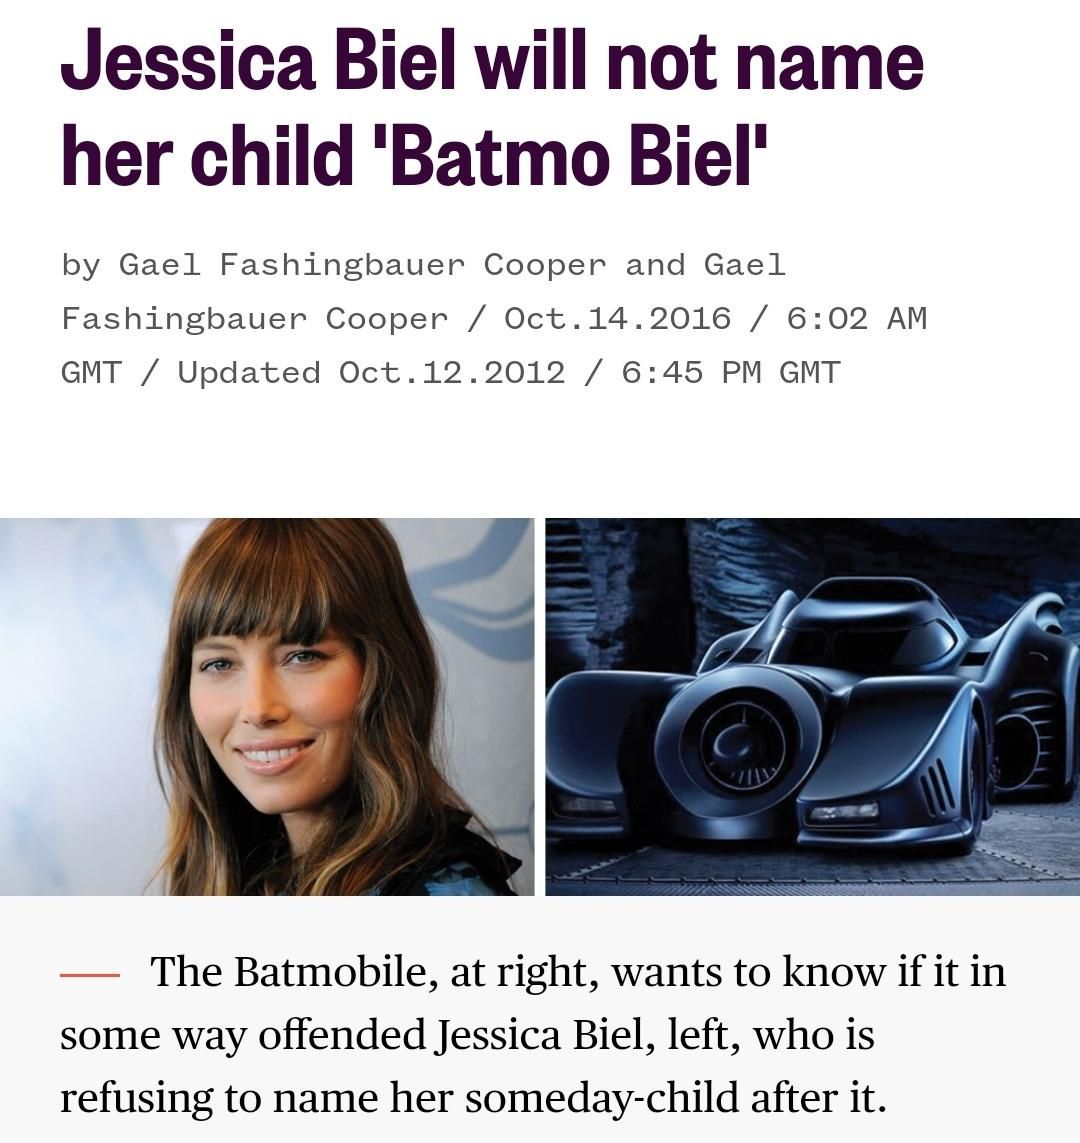 batmo biel meme - Jessica Biel will not name her child 'Batmo Biel' by Gael Fashingbauer Cooper and Gael Fashingbauer Cooper Oct.14.2016 Gmt Updated Oct.12.2012 Gmt The Batmobile, at right, wants to know if it in some way offended Jessica Biel, left, who 